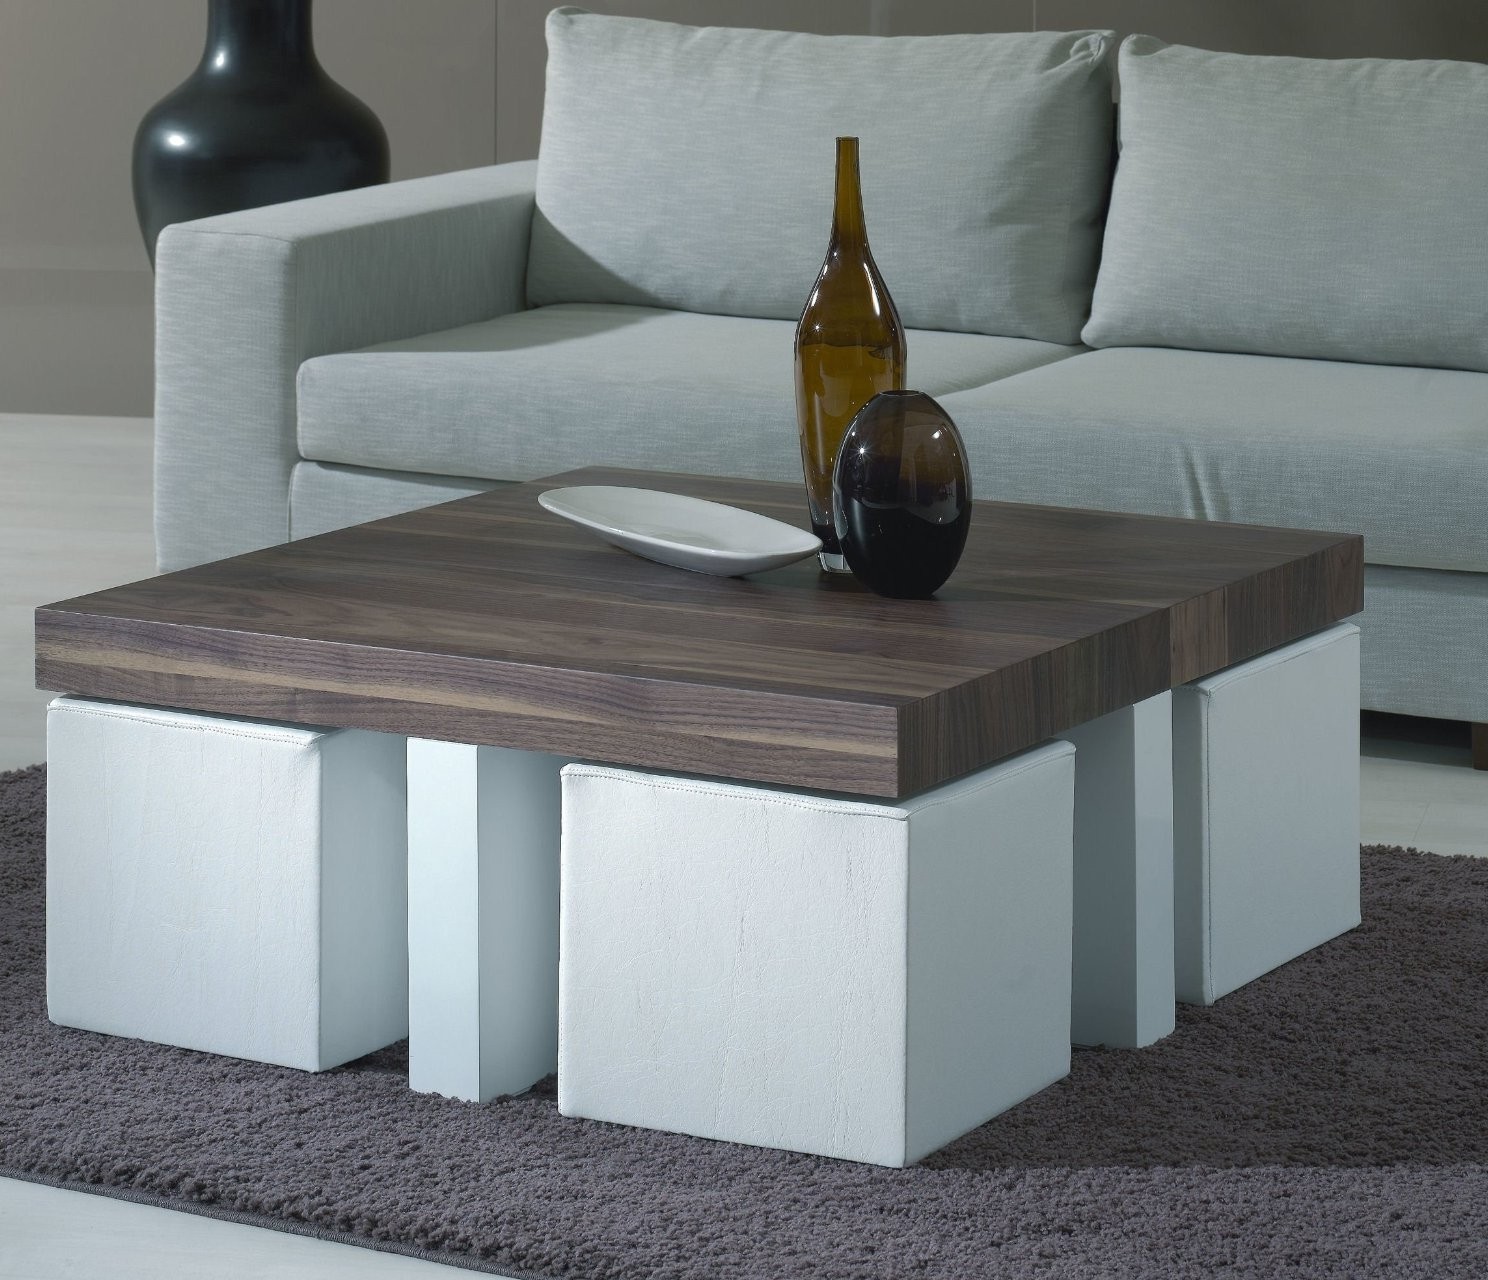 Coffee table with chairs underneath roy home design 20